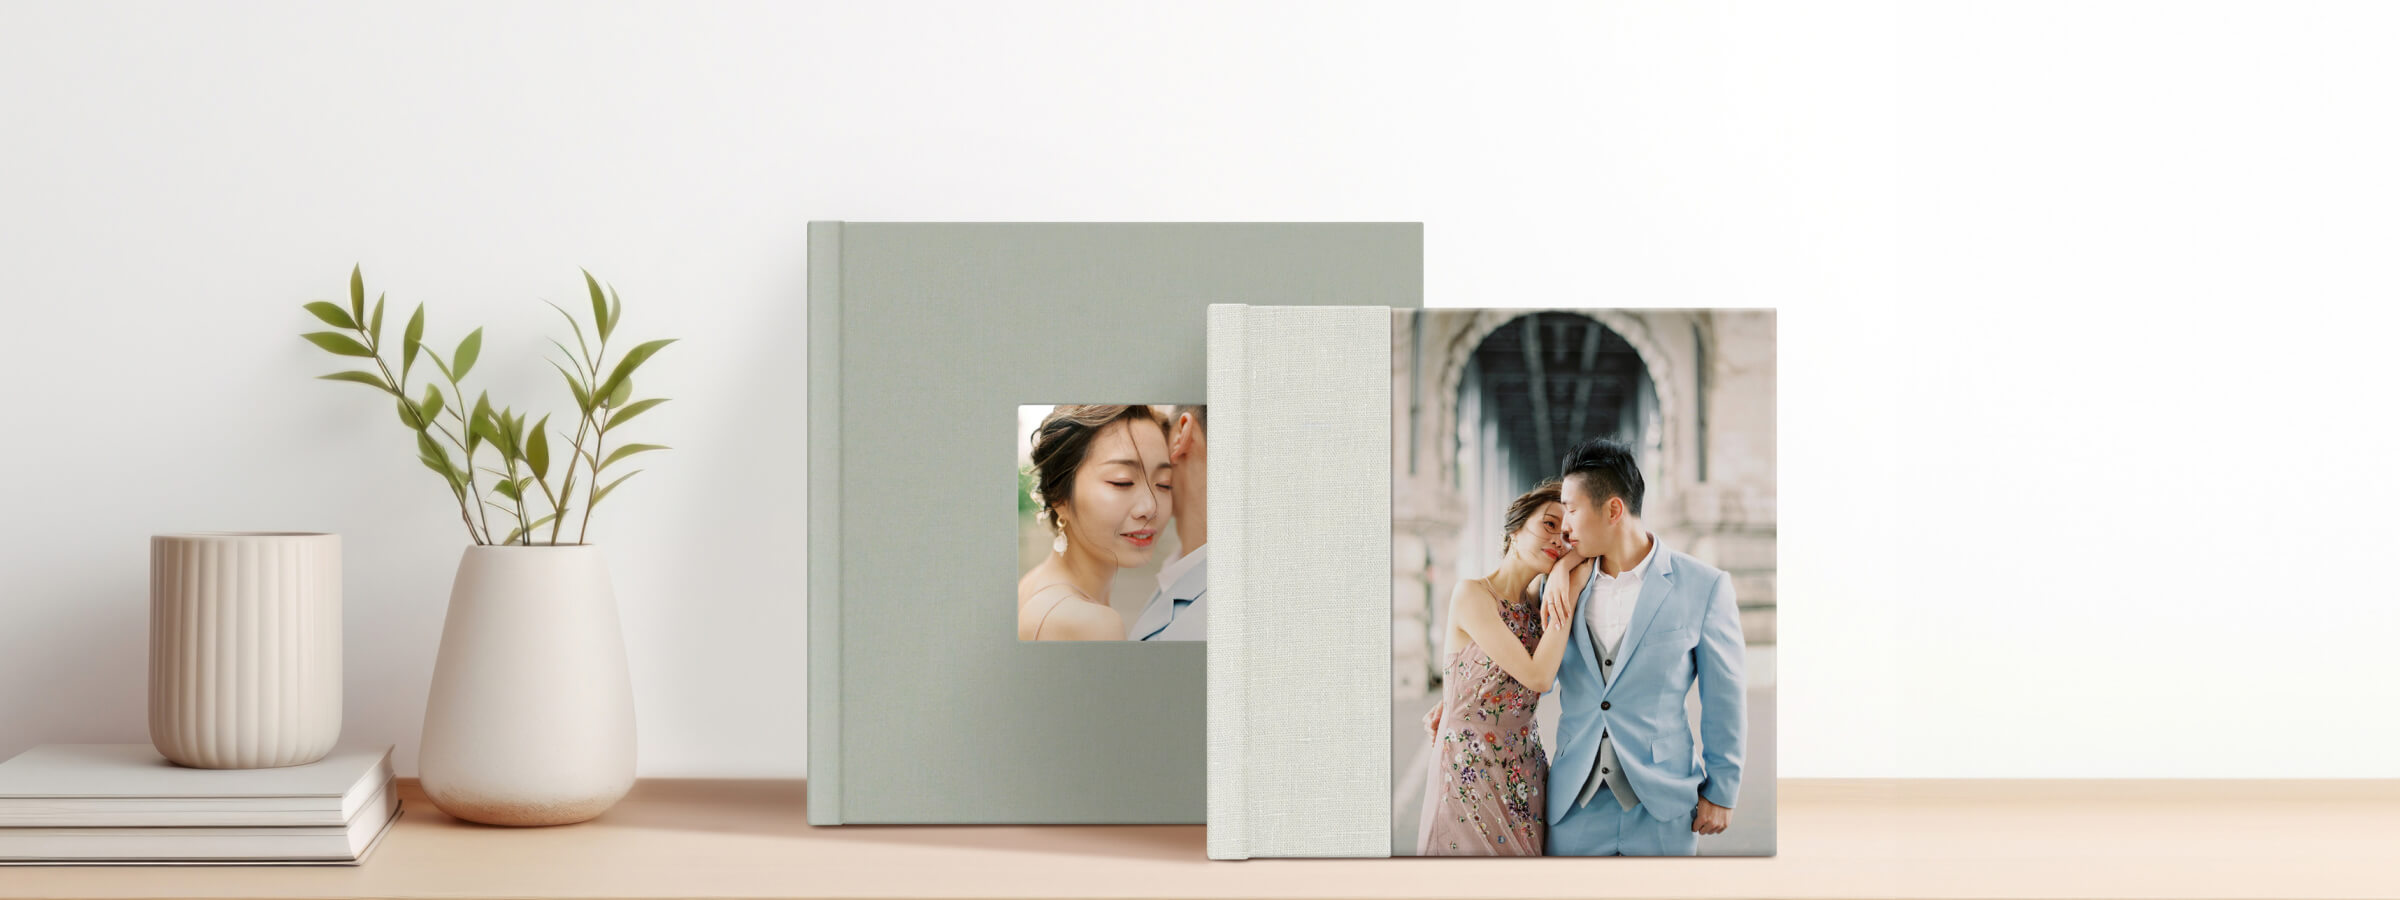 two photo albums in pastel colors featuring photos of a couple dressed up, stand on a table next to a minimalistic vase with greens, a coffee mug and some magazines